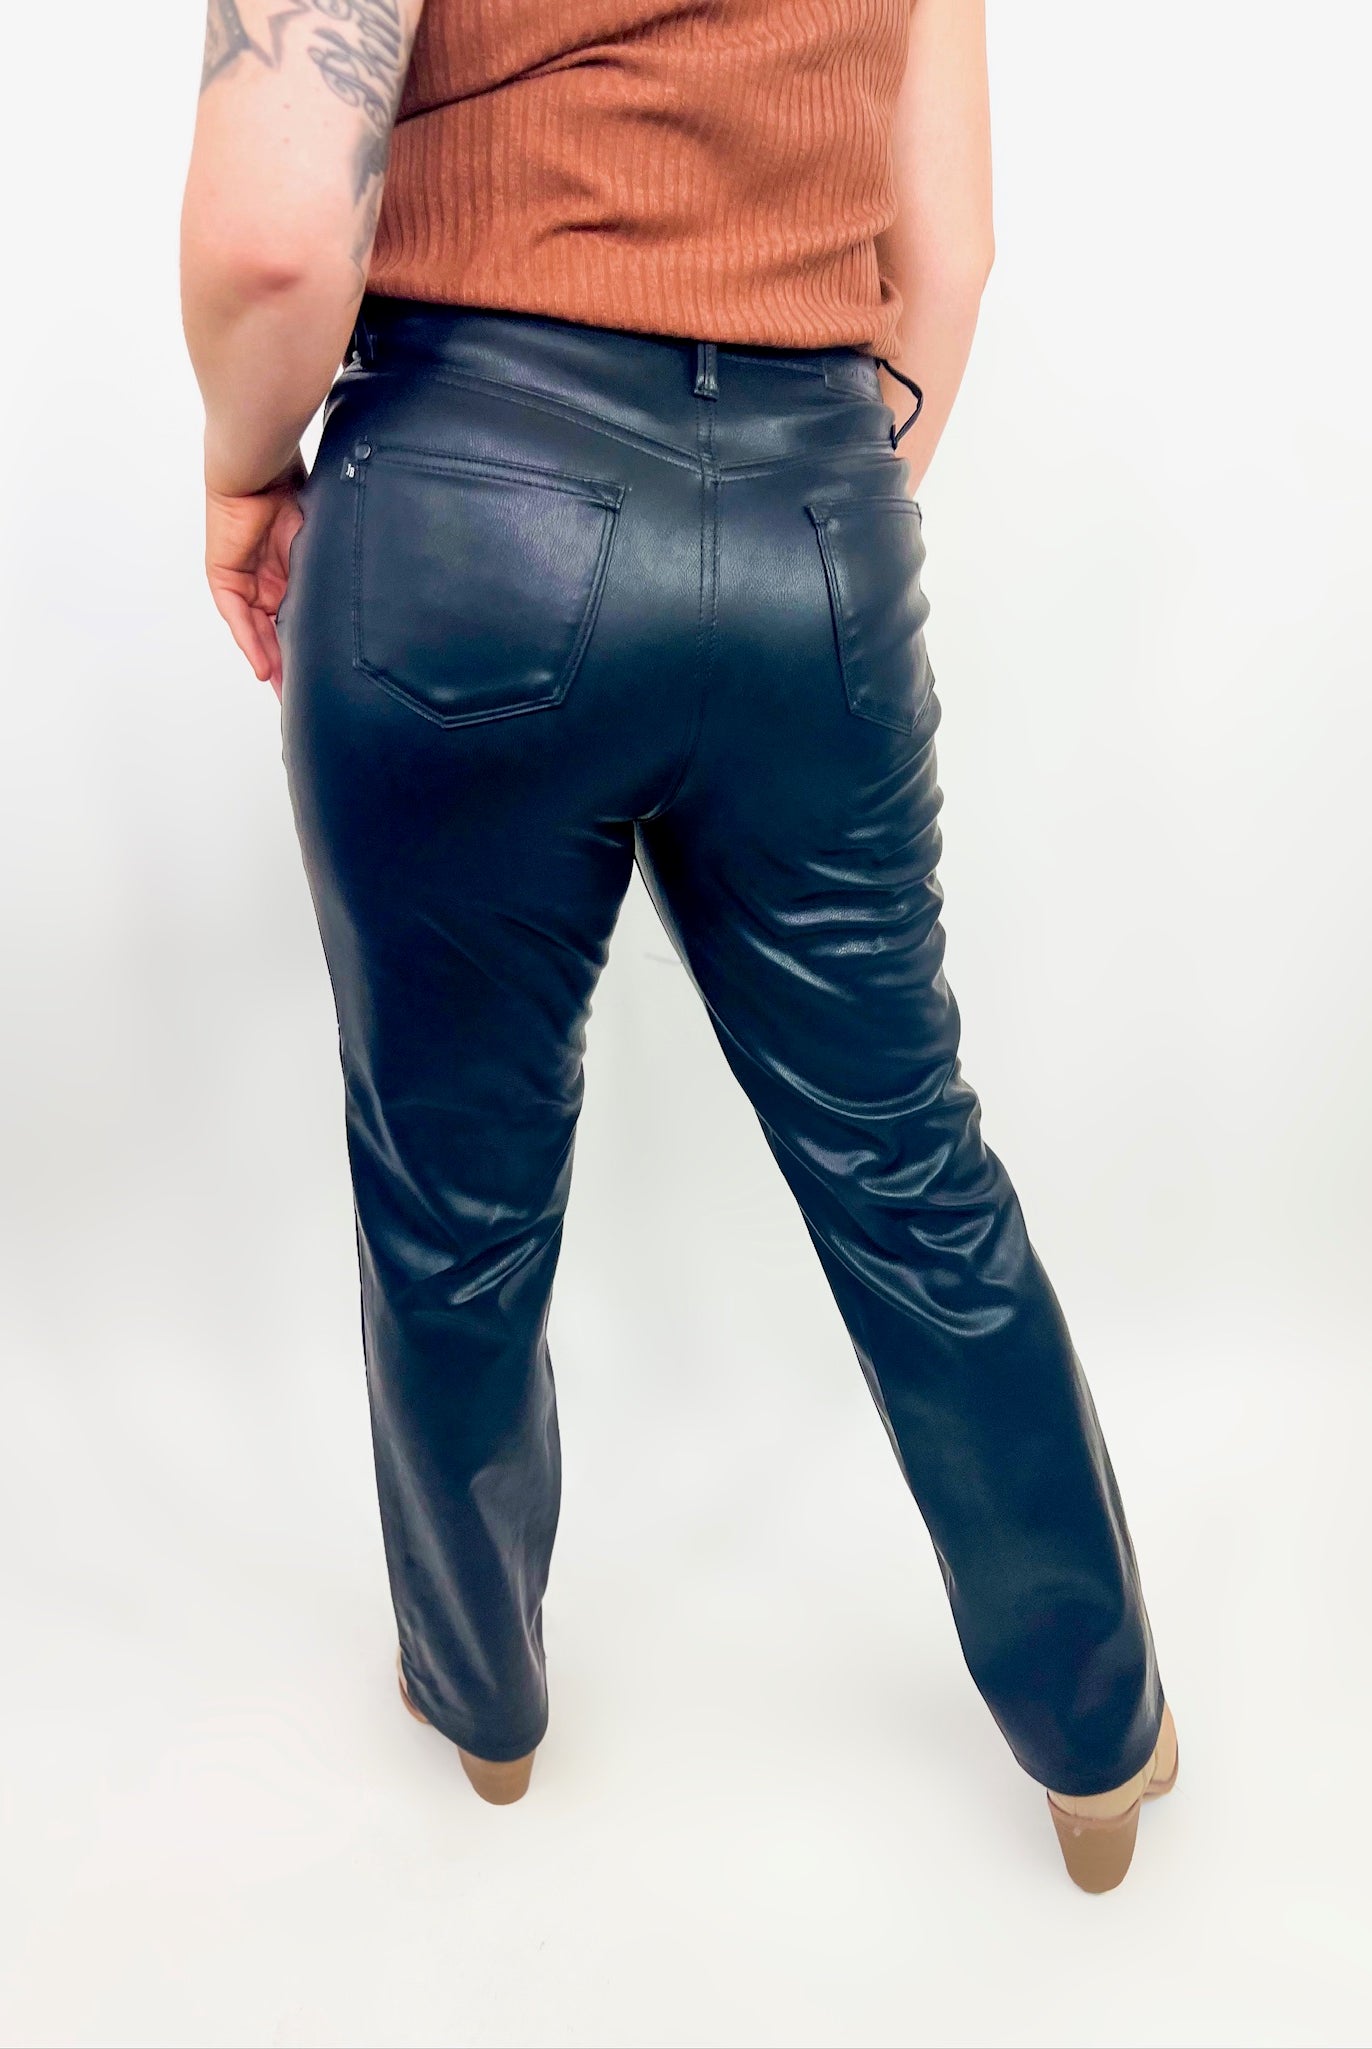 Baddie Leather Straight Leg by Judy Blue-190 Jeans-Judy Blue-Heathered Boho Boutique, Women's Fashion and Accessories in Palmetto, FL